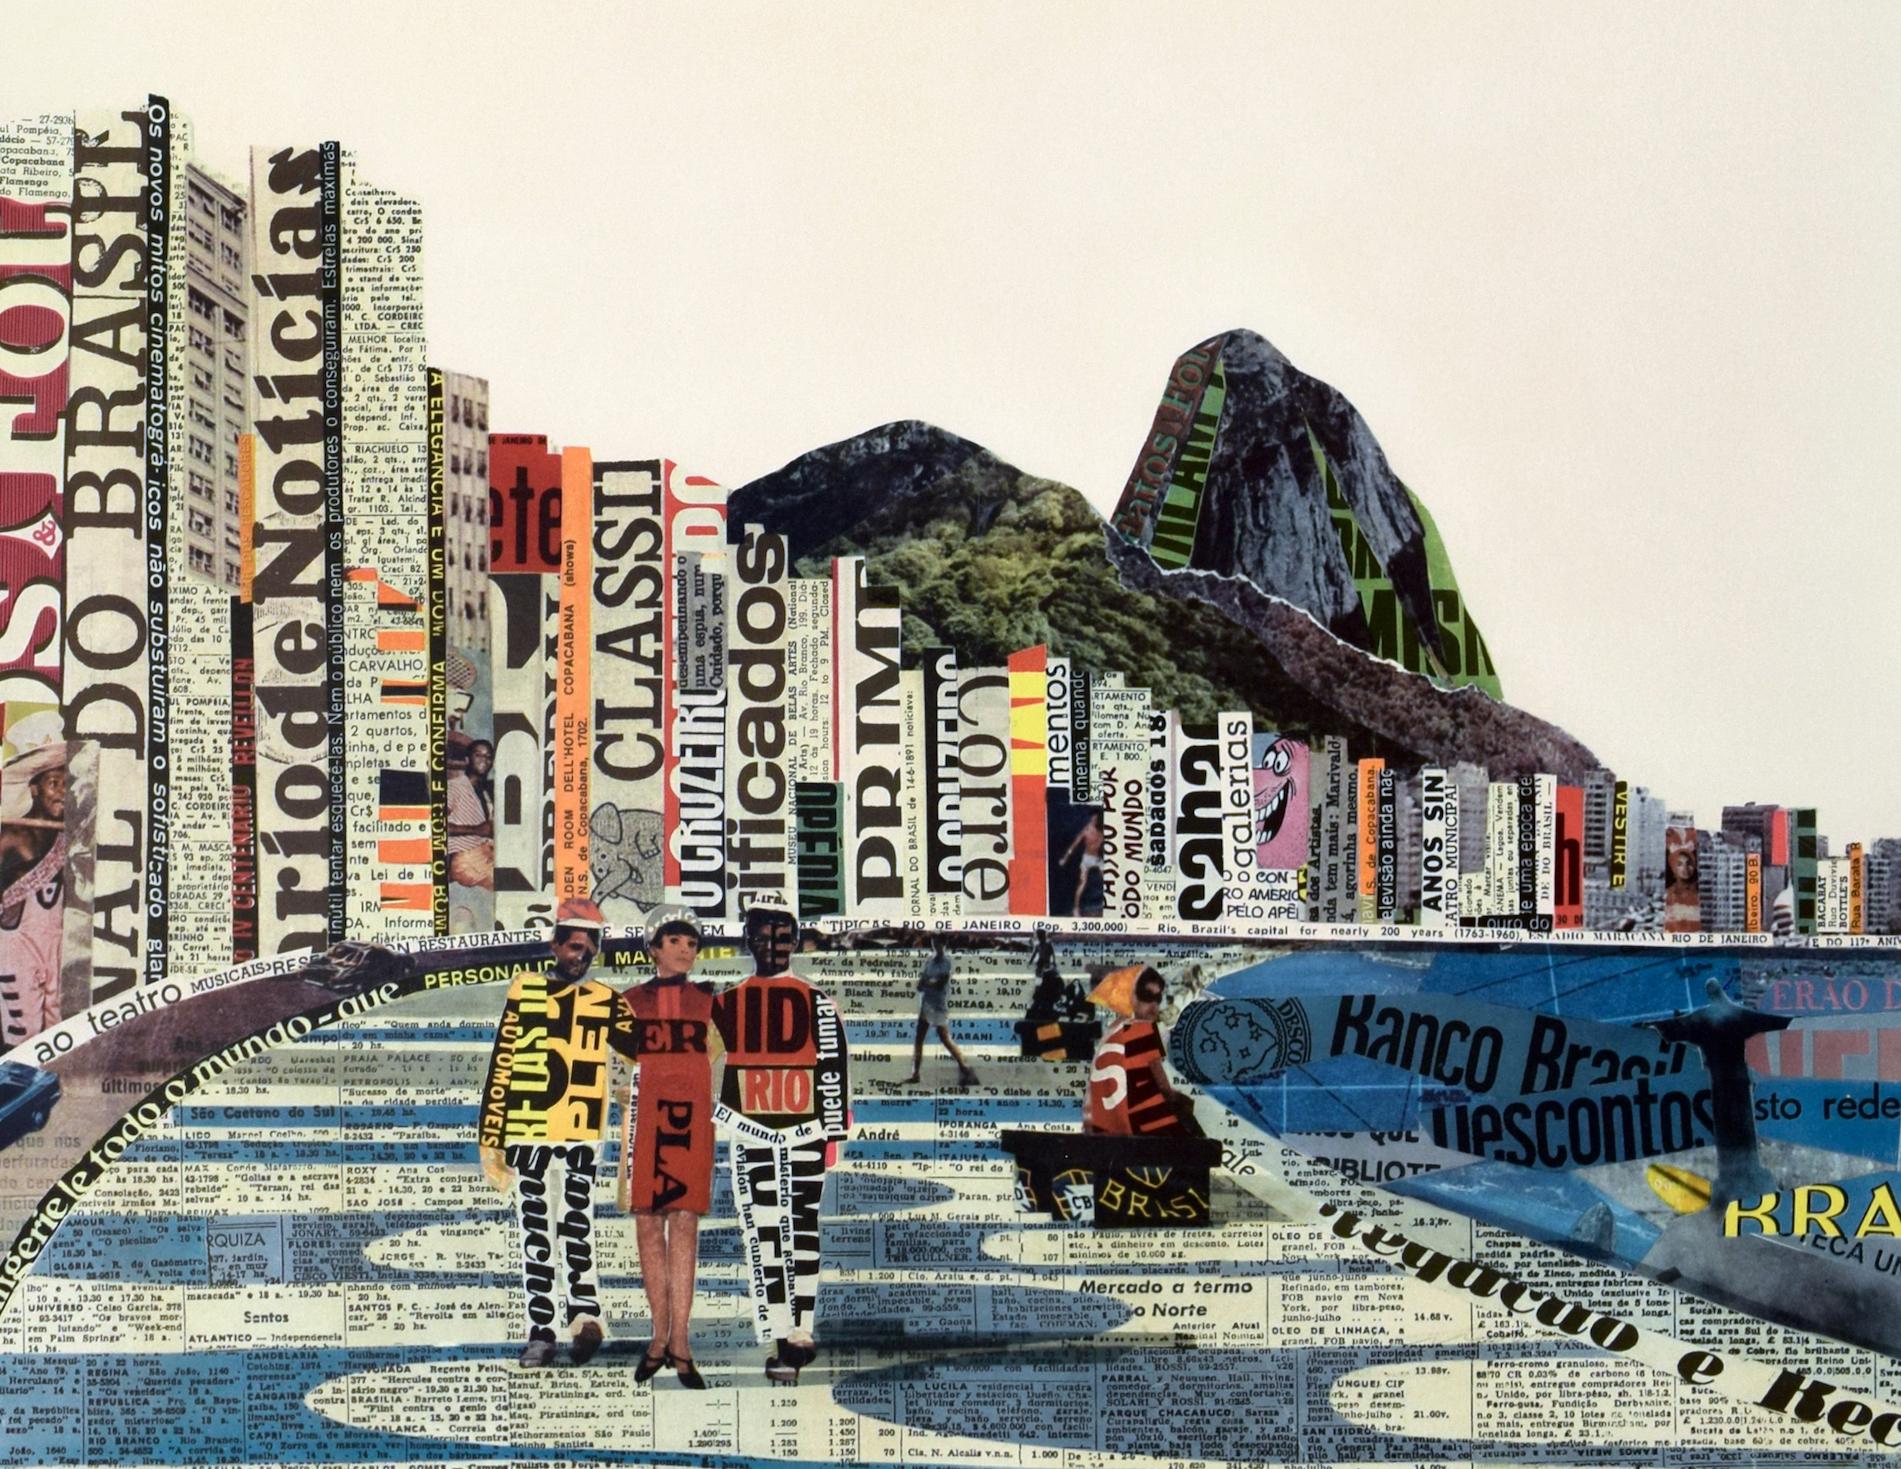 Incredible graphics using typographic collage on this sixties poster creating the vibe of Rio de Janeiro’s Copacabana beach with the Sugarloaf mountain in the background.

This poster is in good condition and backed to linen. It will be sent